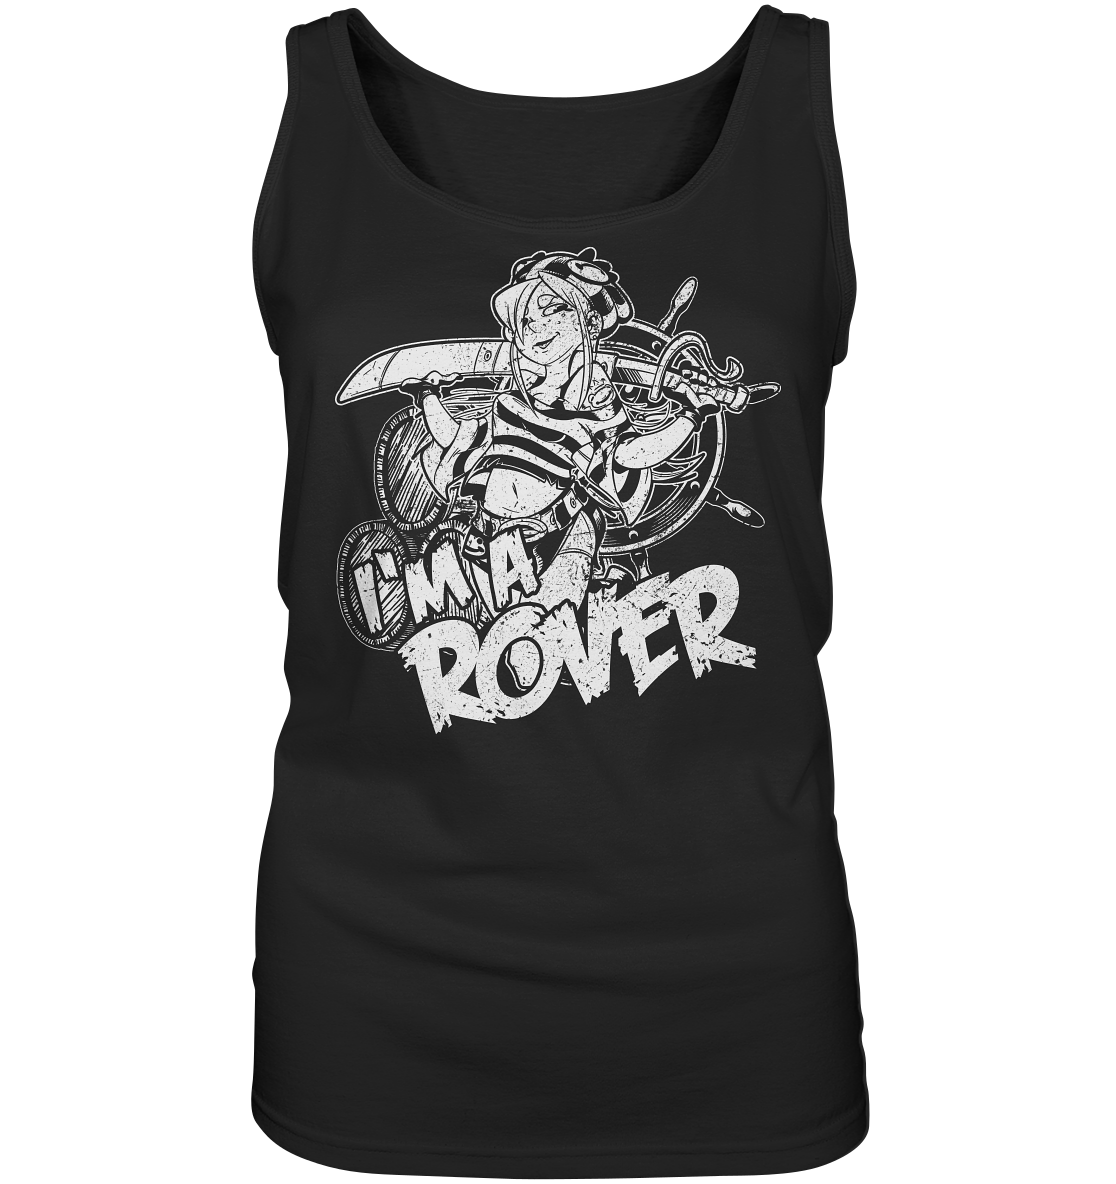 I'm A Rover "Girl" - Ladies Tank-Top